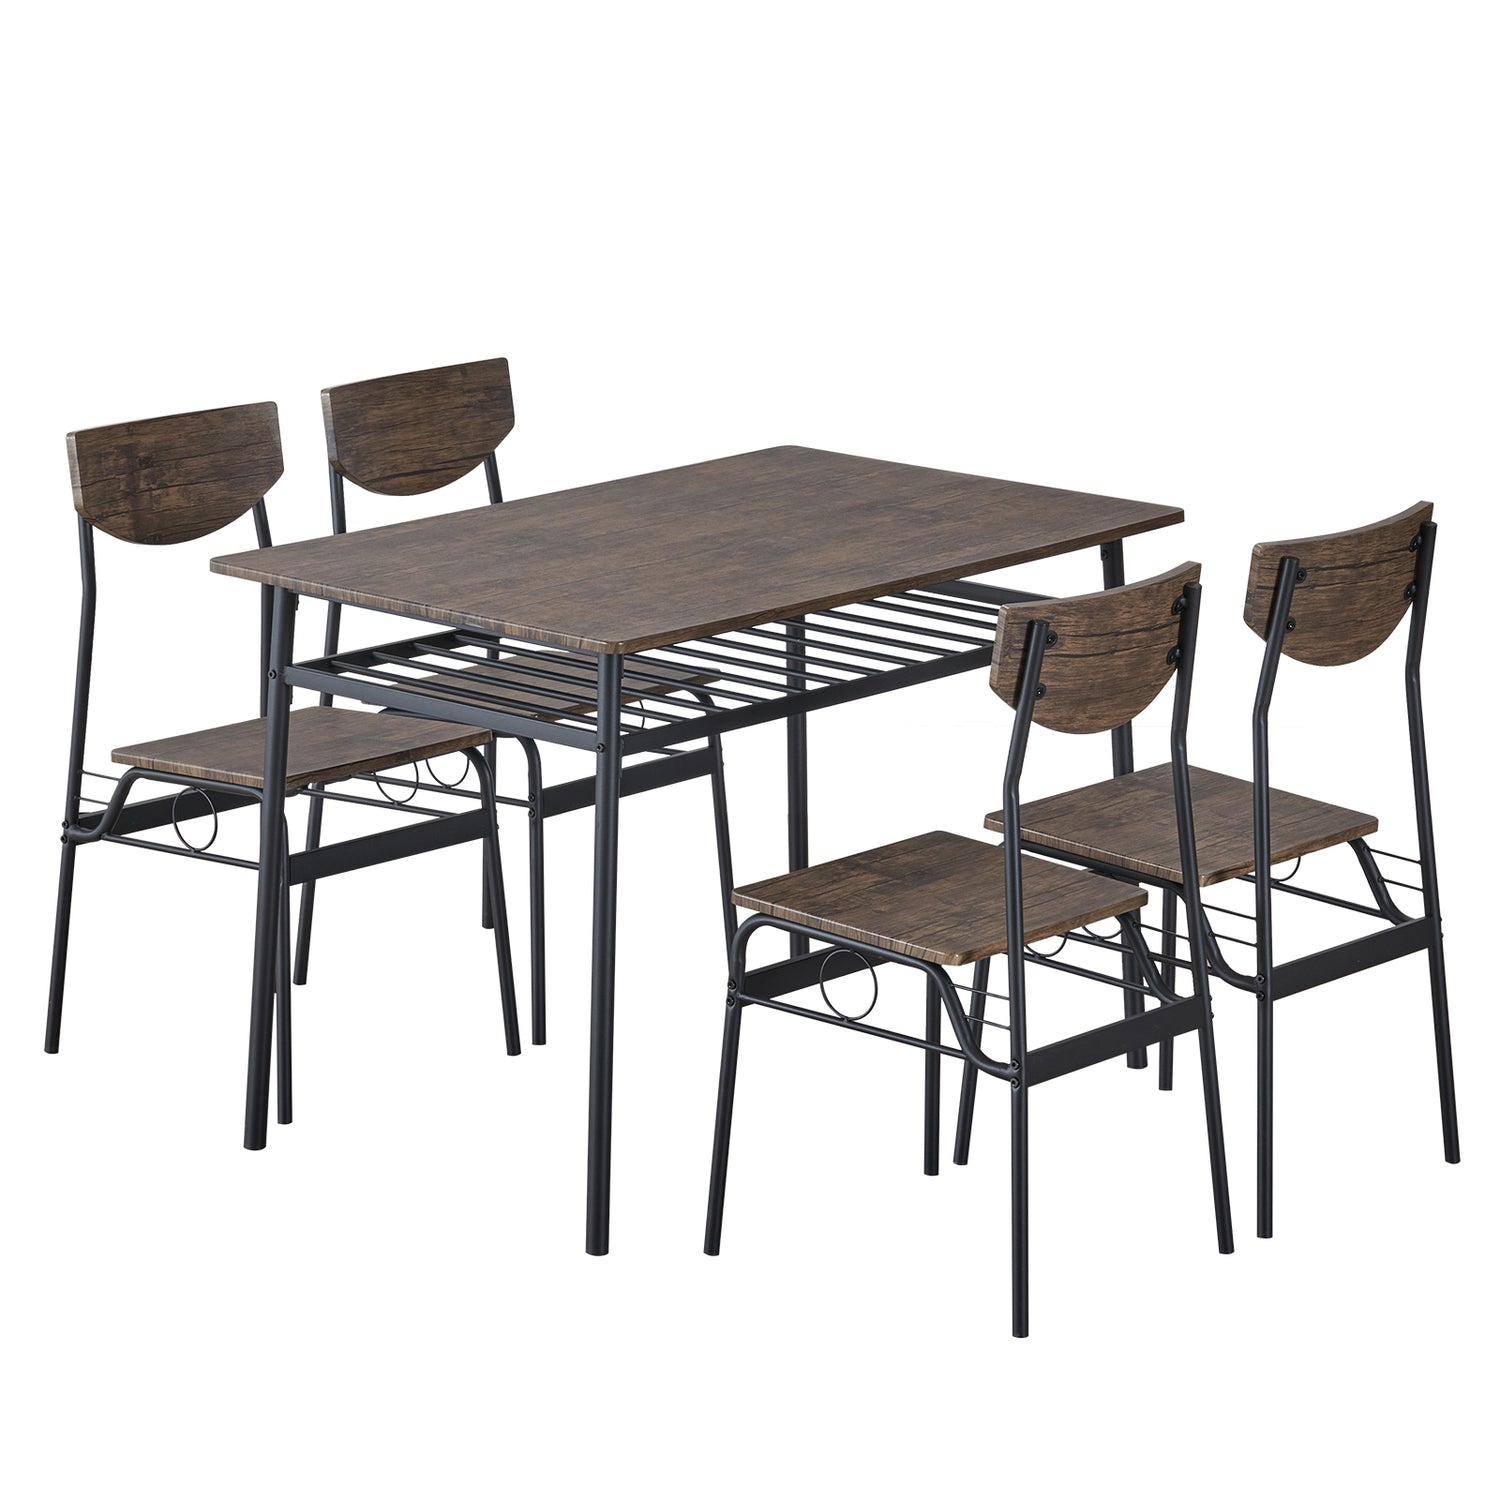 SESSLIFE Kitchen Table and Chairs for 2, Modern Dining Room Table